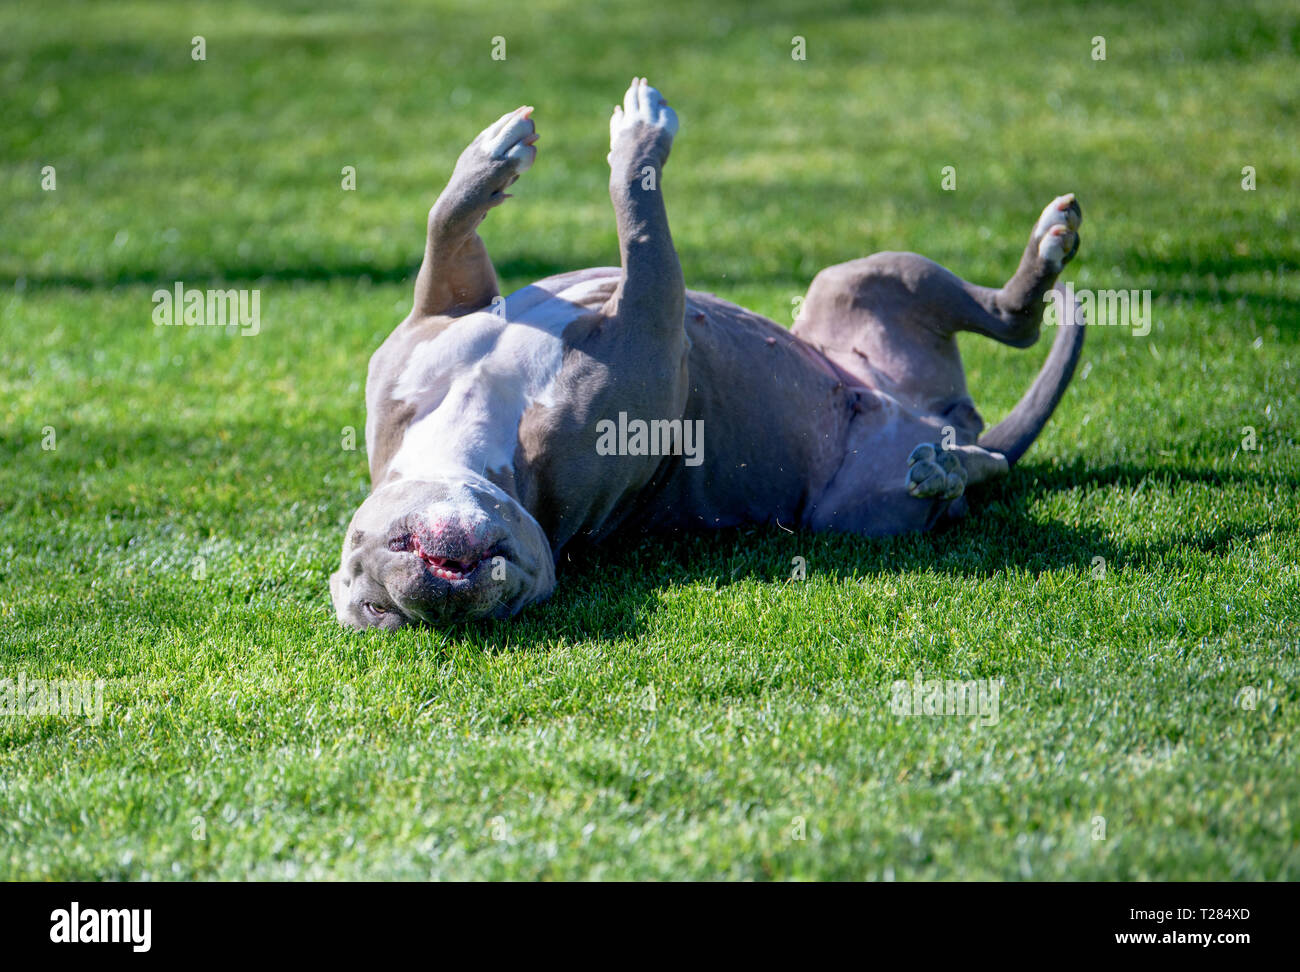 Dog on her back enjoying a roll on the lawn Stock Photo